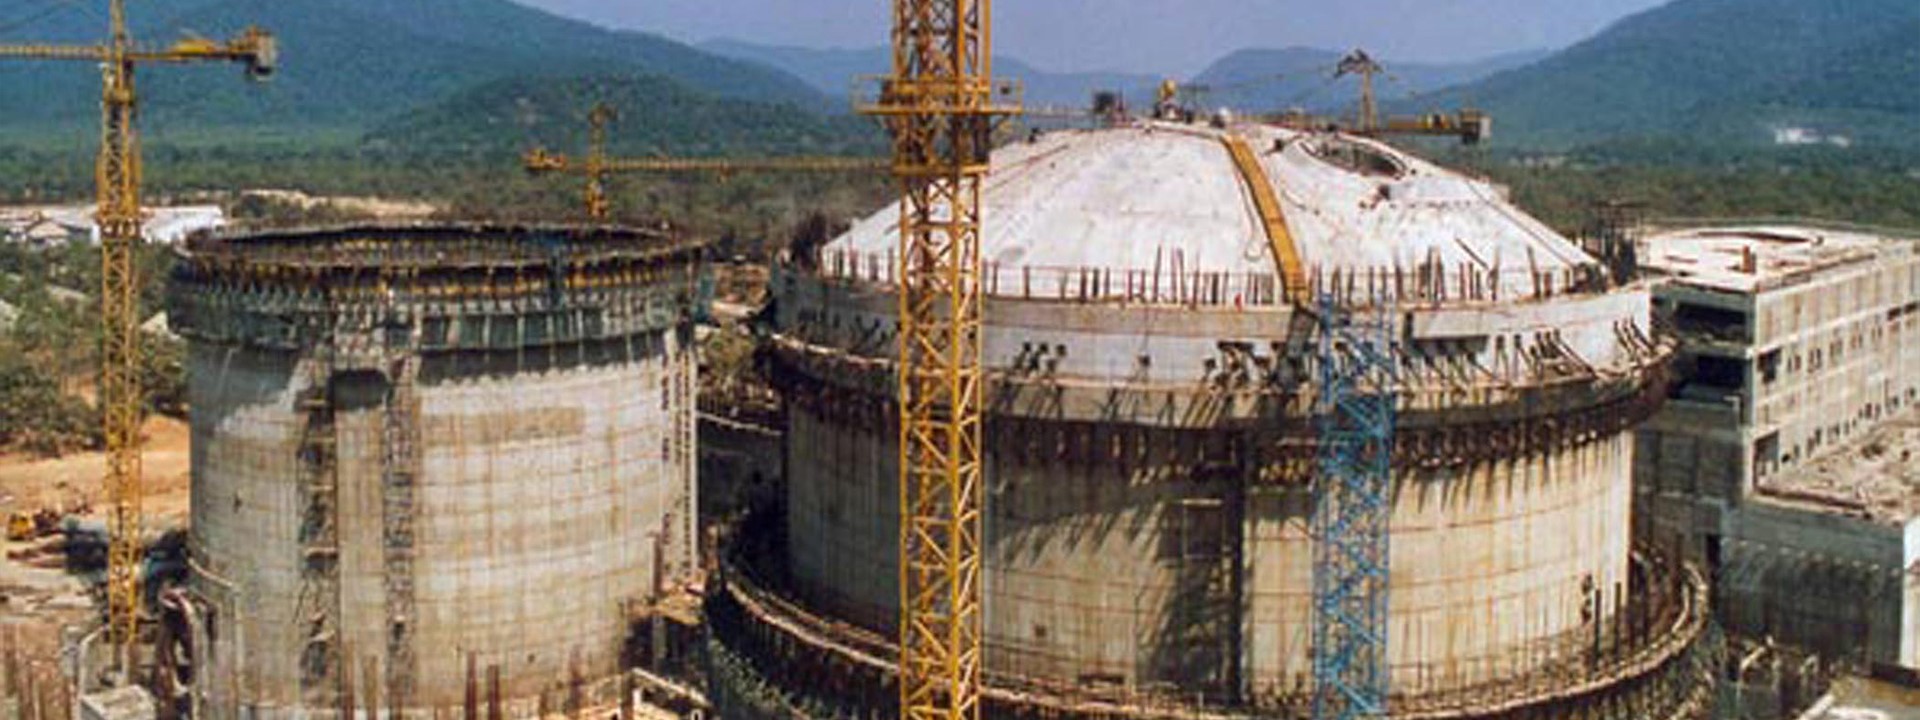 Atomic Power plant in Kaiga - L&T Construction